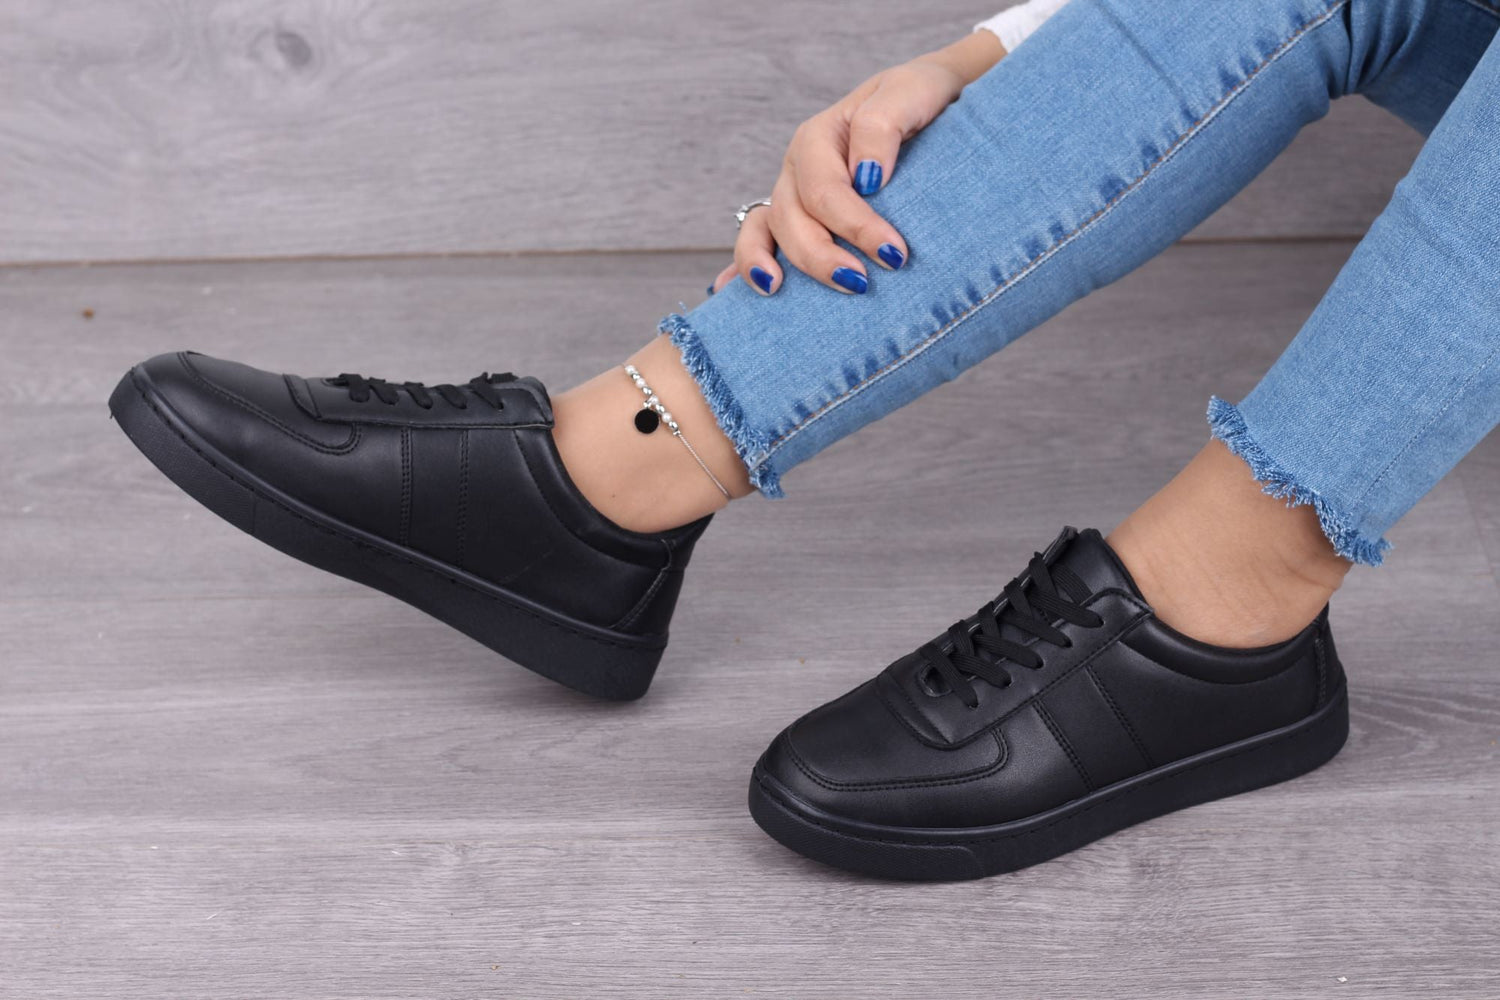 Sneakers women's black leather, plain. Simple sneakers suitable for all occasions.